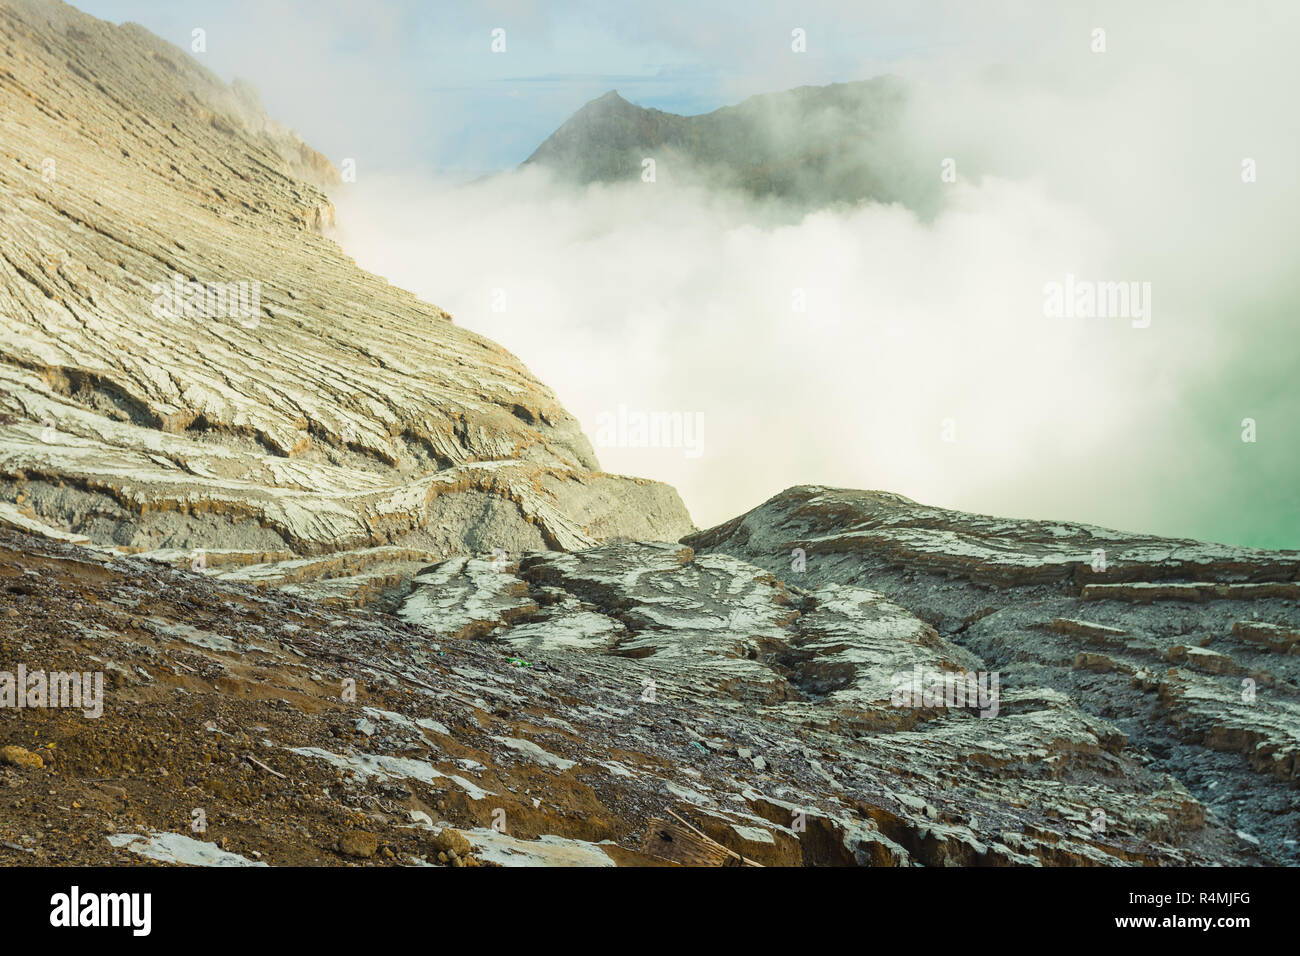 Sulfuric cloud out from Ijen mountain crater in Banyuwangi, Indonesia Stock Photo